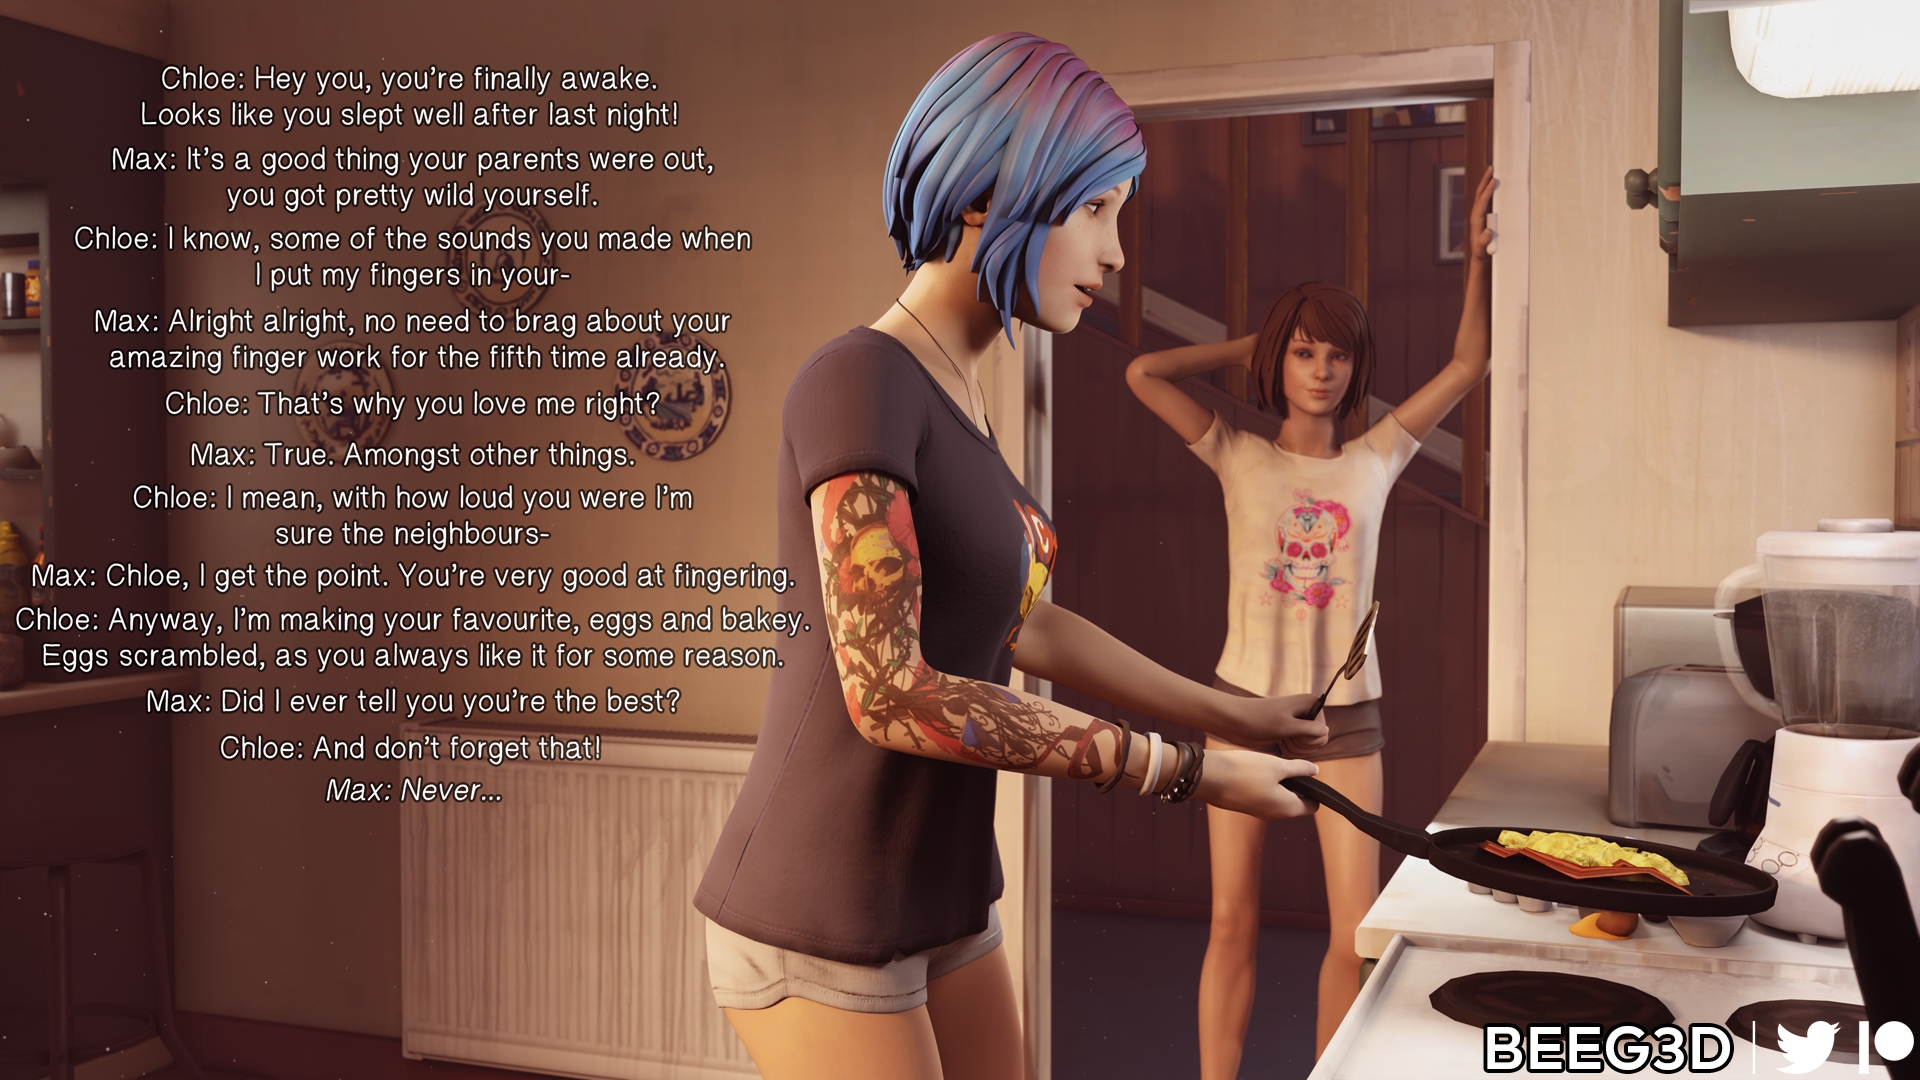 Max & Chloe - Morning Breakfast Part 1 Life Is Strange Max Caulfield Chloe Price Lesbian 2girls Kissing Eating Pussy Partially_clothed Bottomless